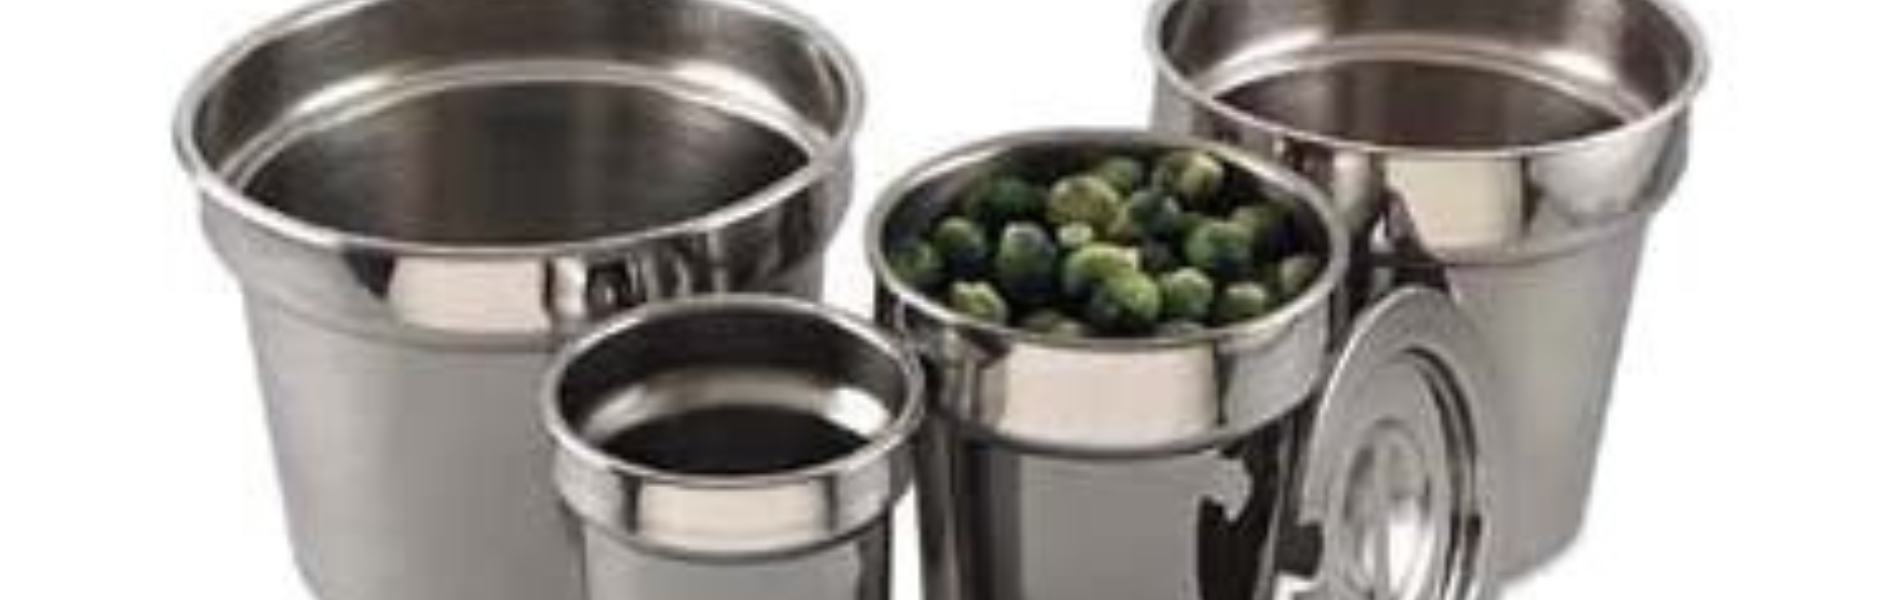 Bain Marie Pots and Vegetable Insets